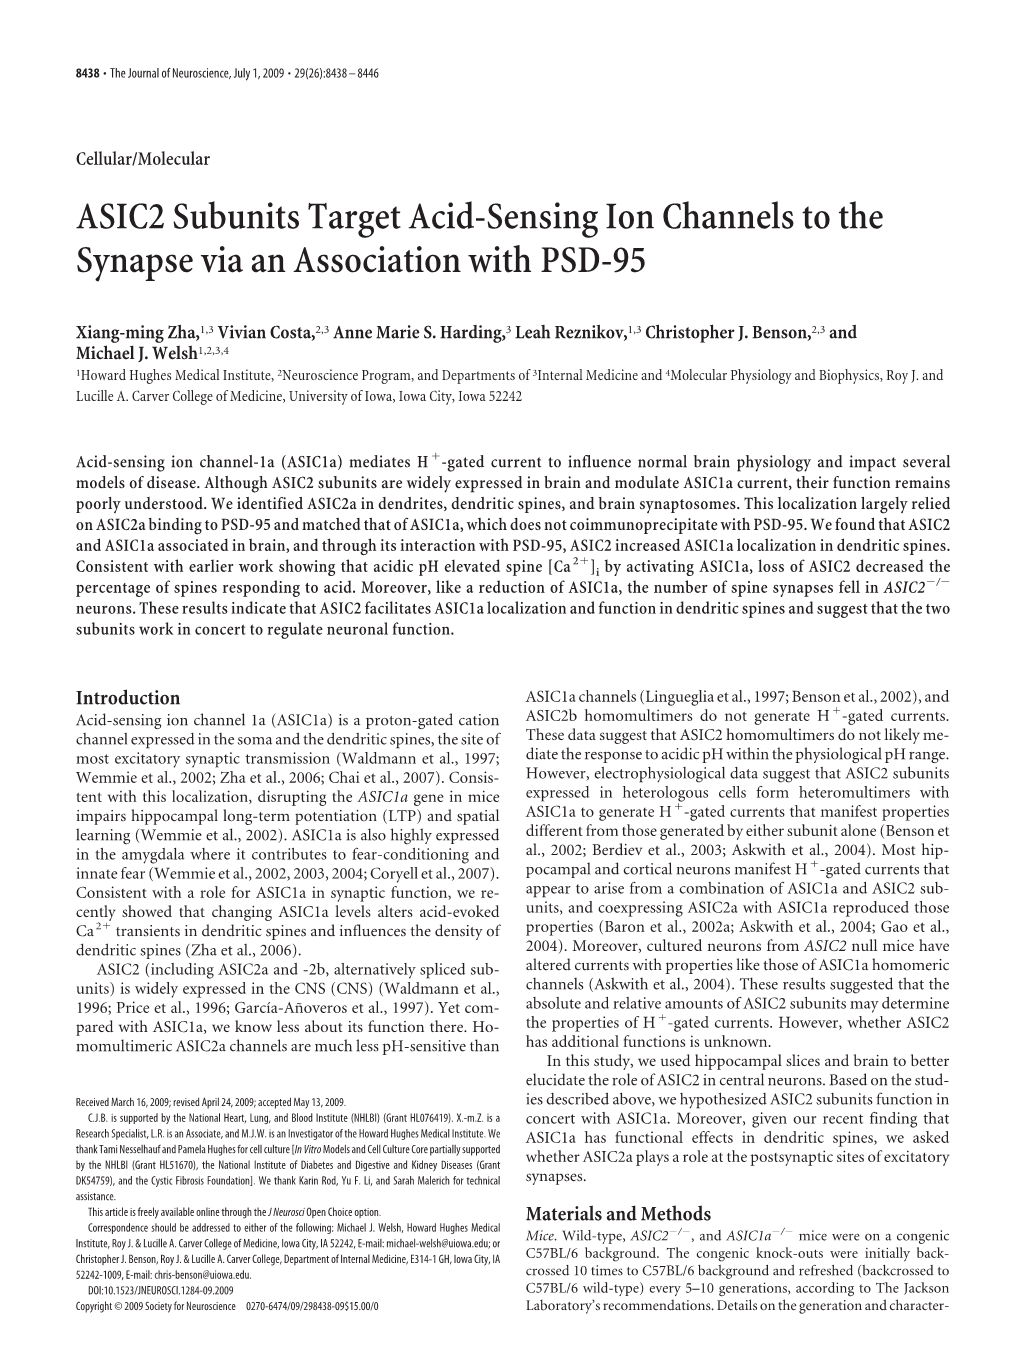 ASIC2 Subunits Target Acid-Sensing Ion Channels to the Synapse Via an Association with PSD-95